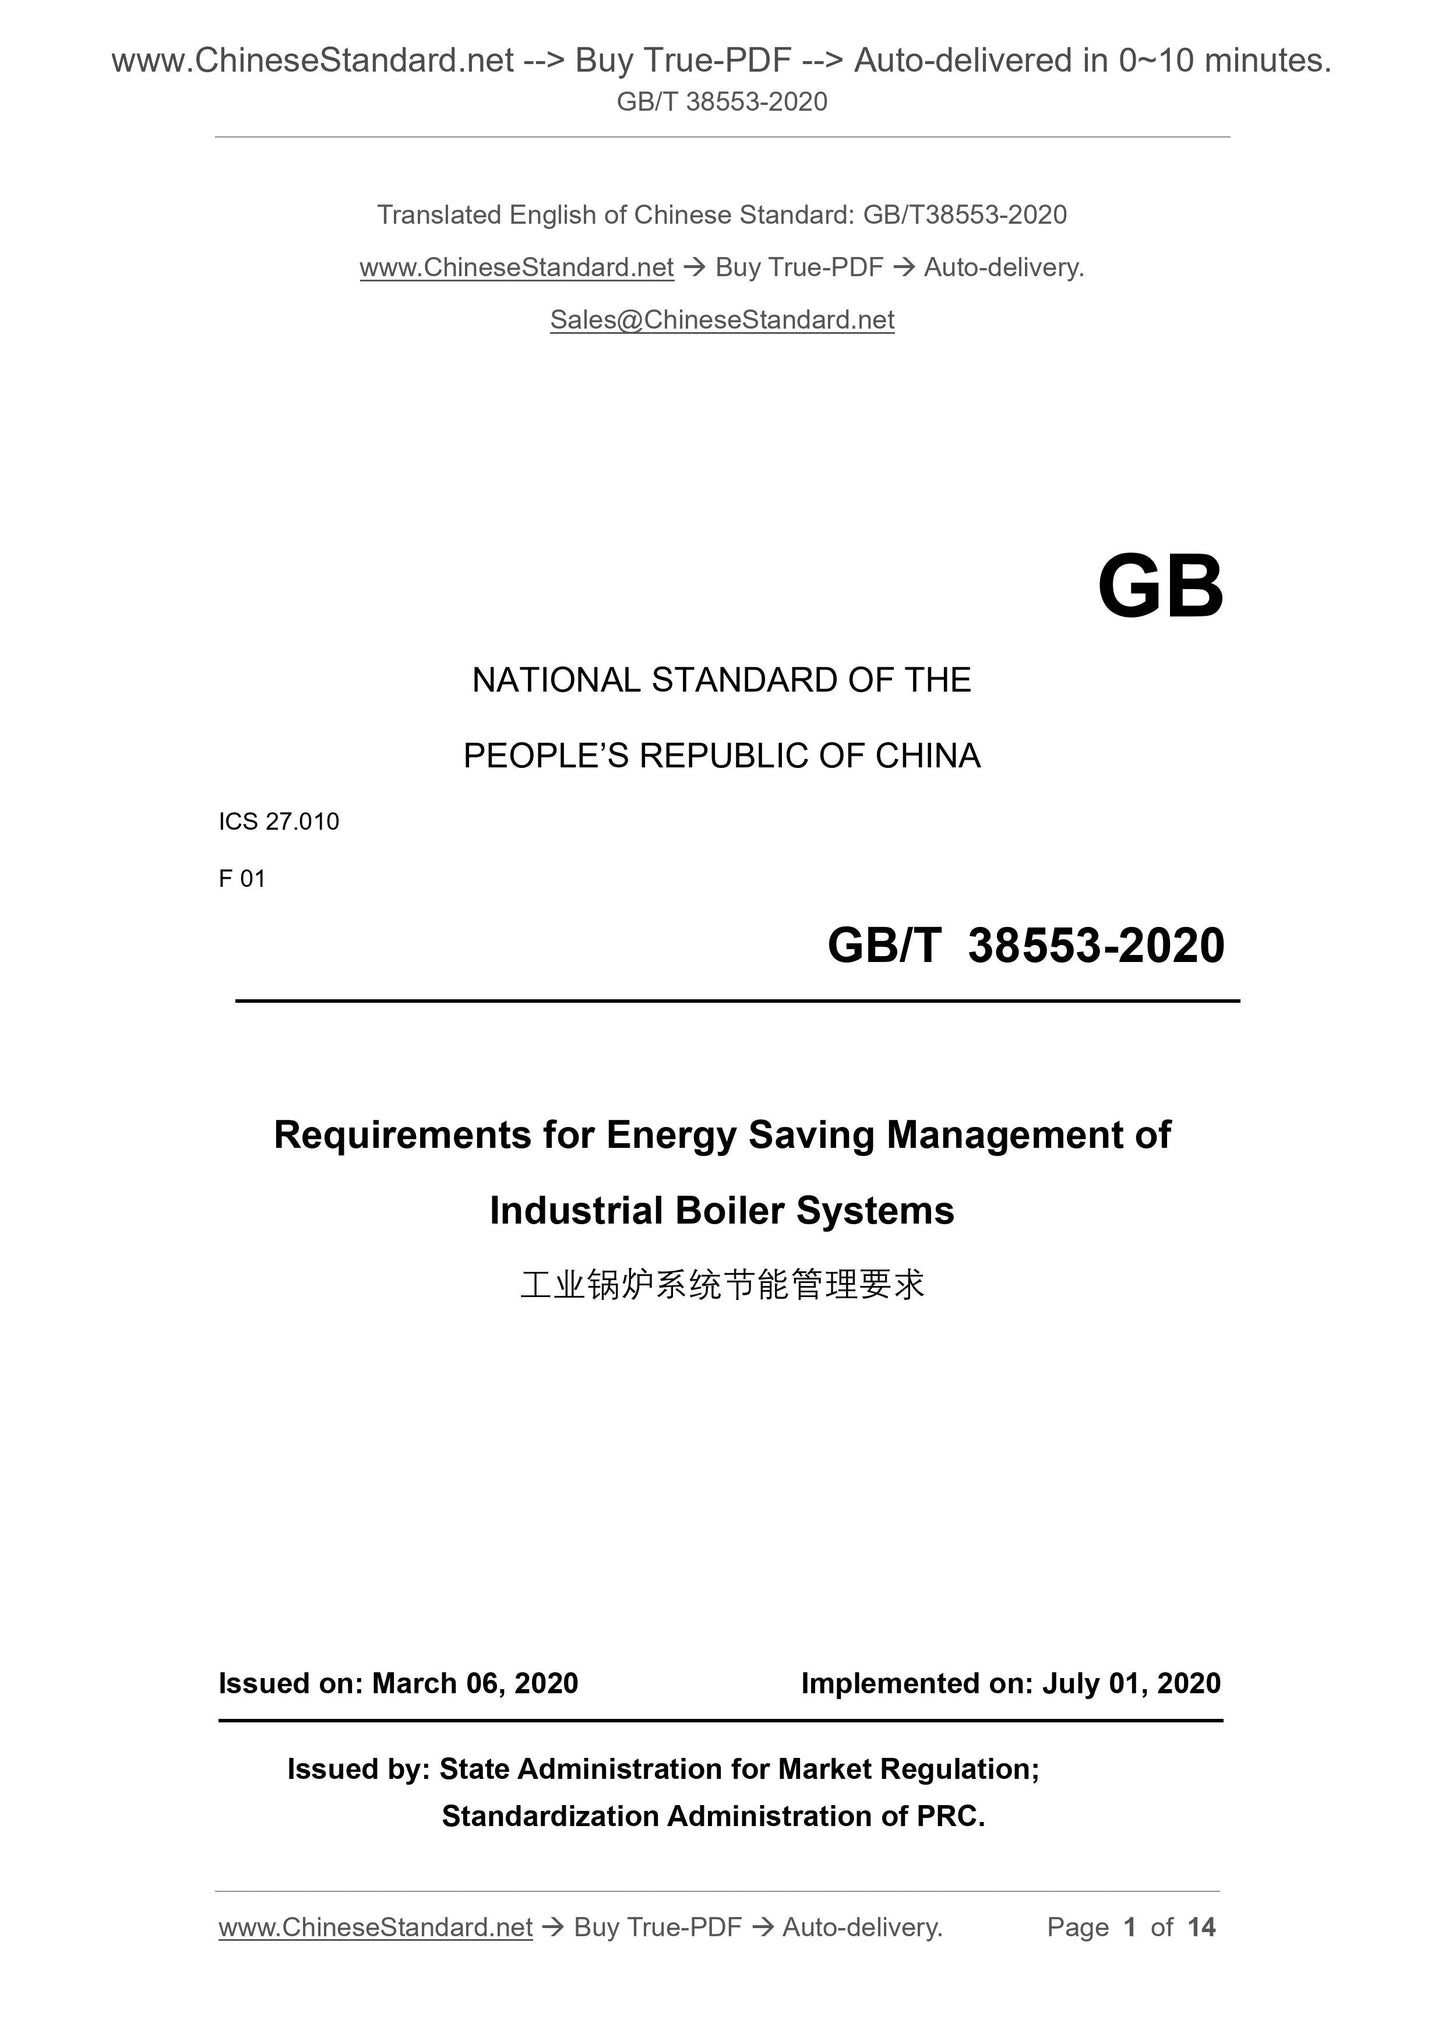 GB/T 38553-2020 Page 1